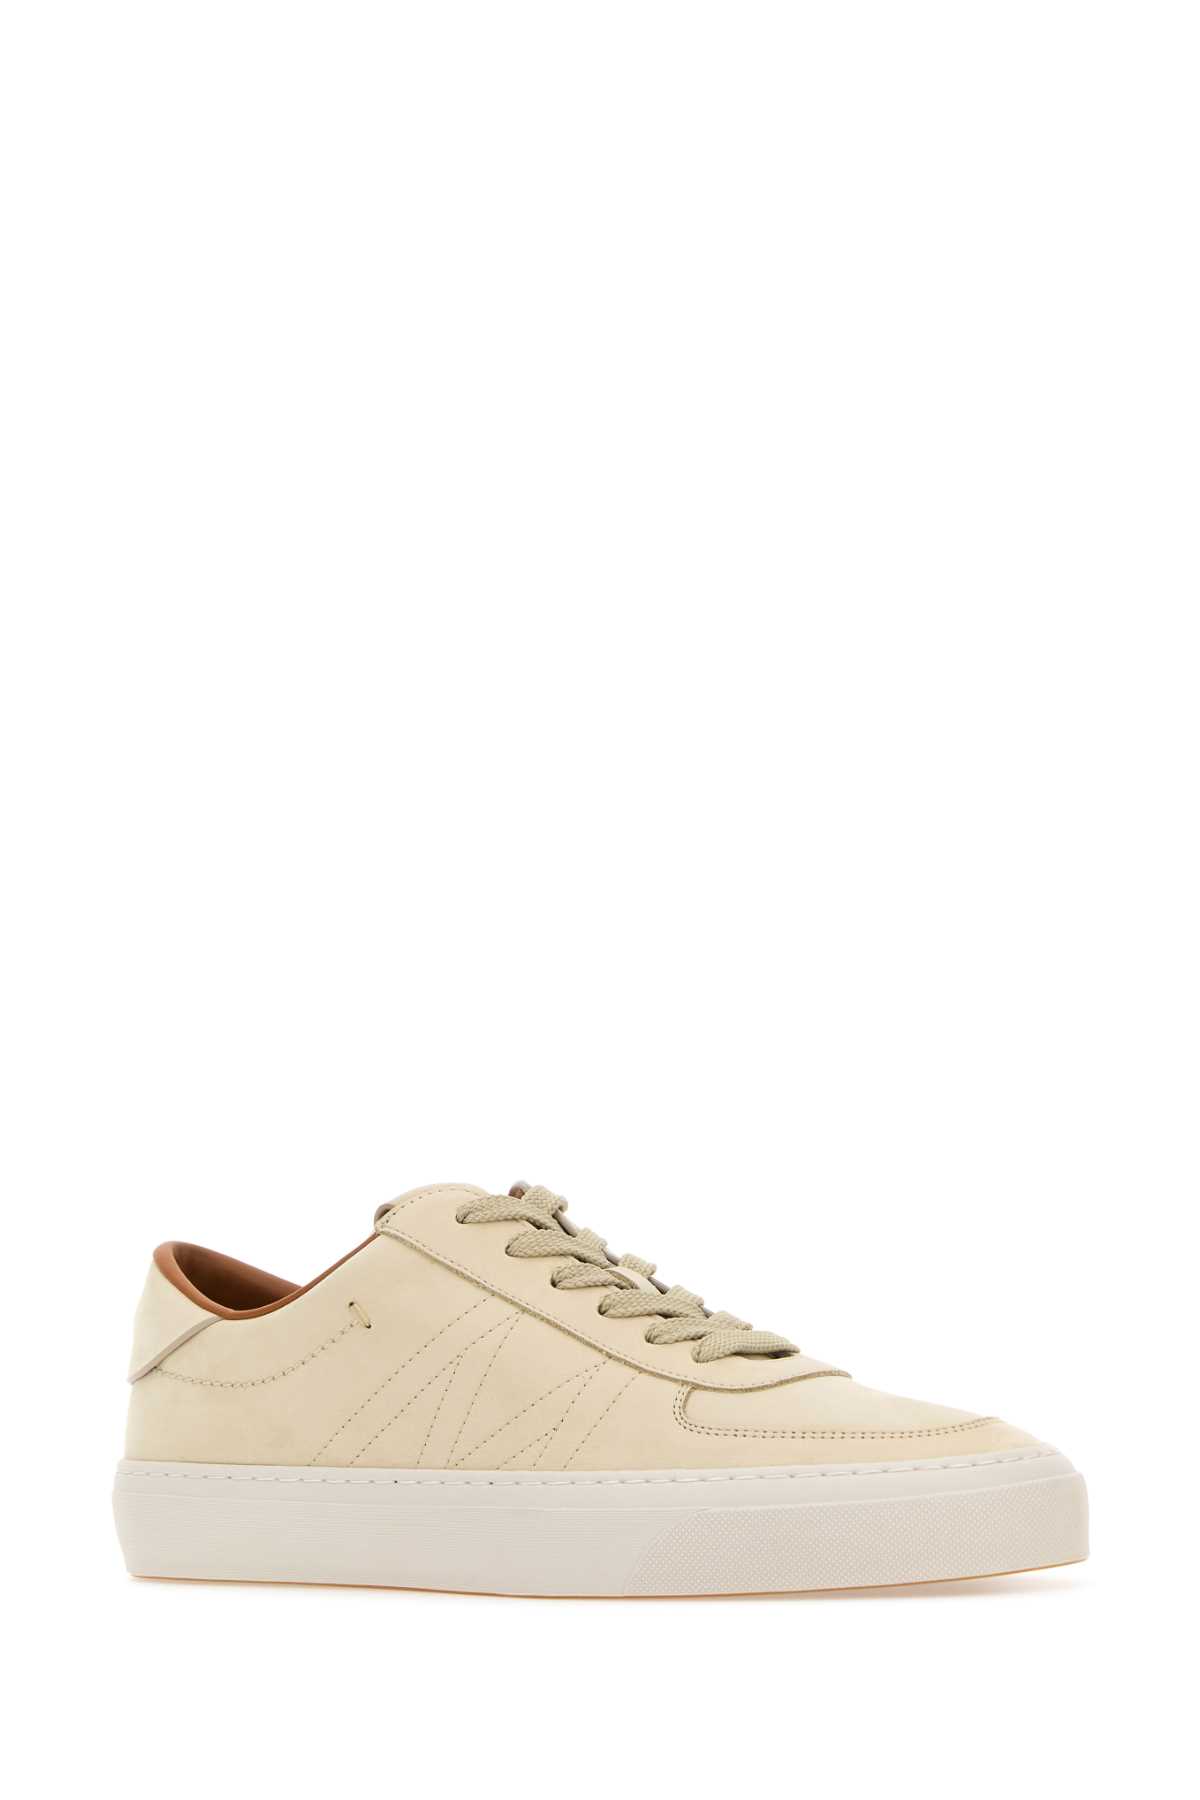 MONCLER SAND LEATHER MONCLUB SNEAKERS